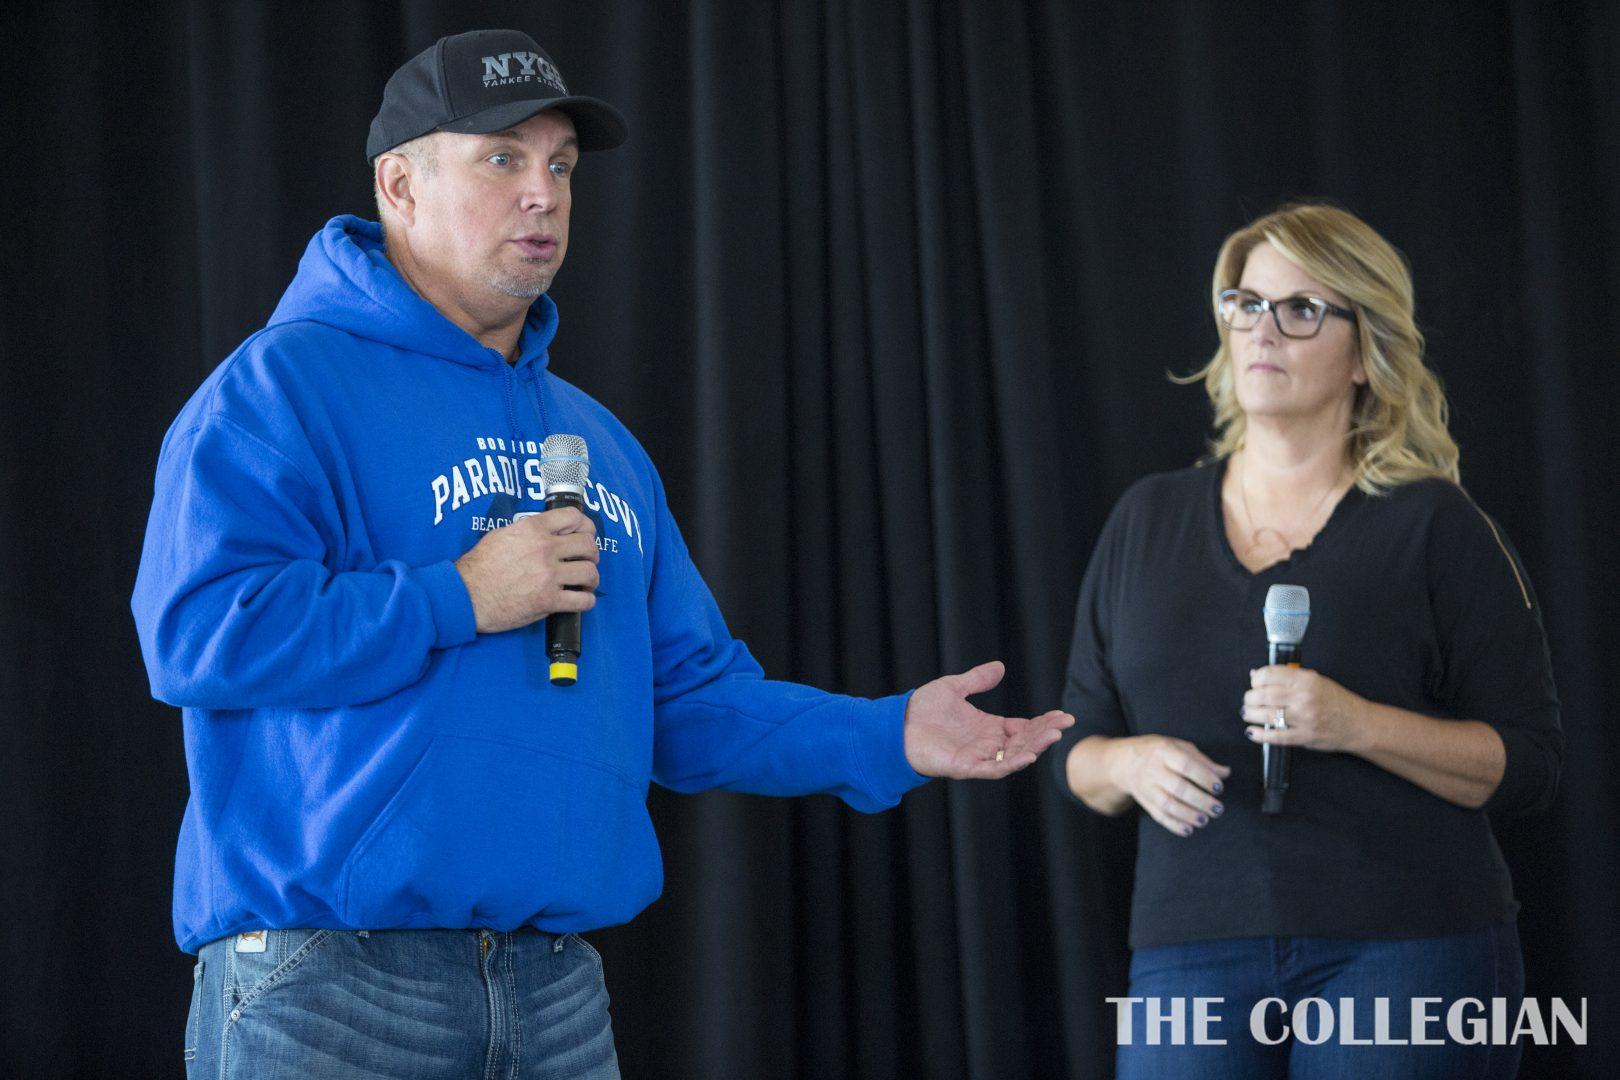 Garth+Brooks+and+Trisha+Yearwood+speak+at+a+press+conference+before+Friday+nights+show.+%28Khone+Saysamongdy%2F+The+Collegian%29